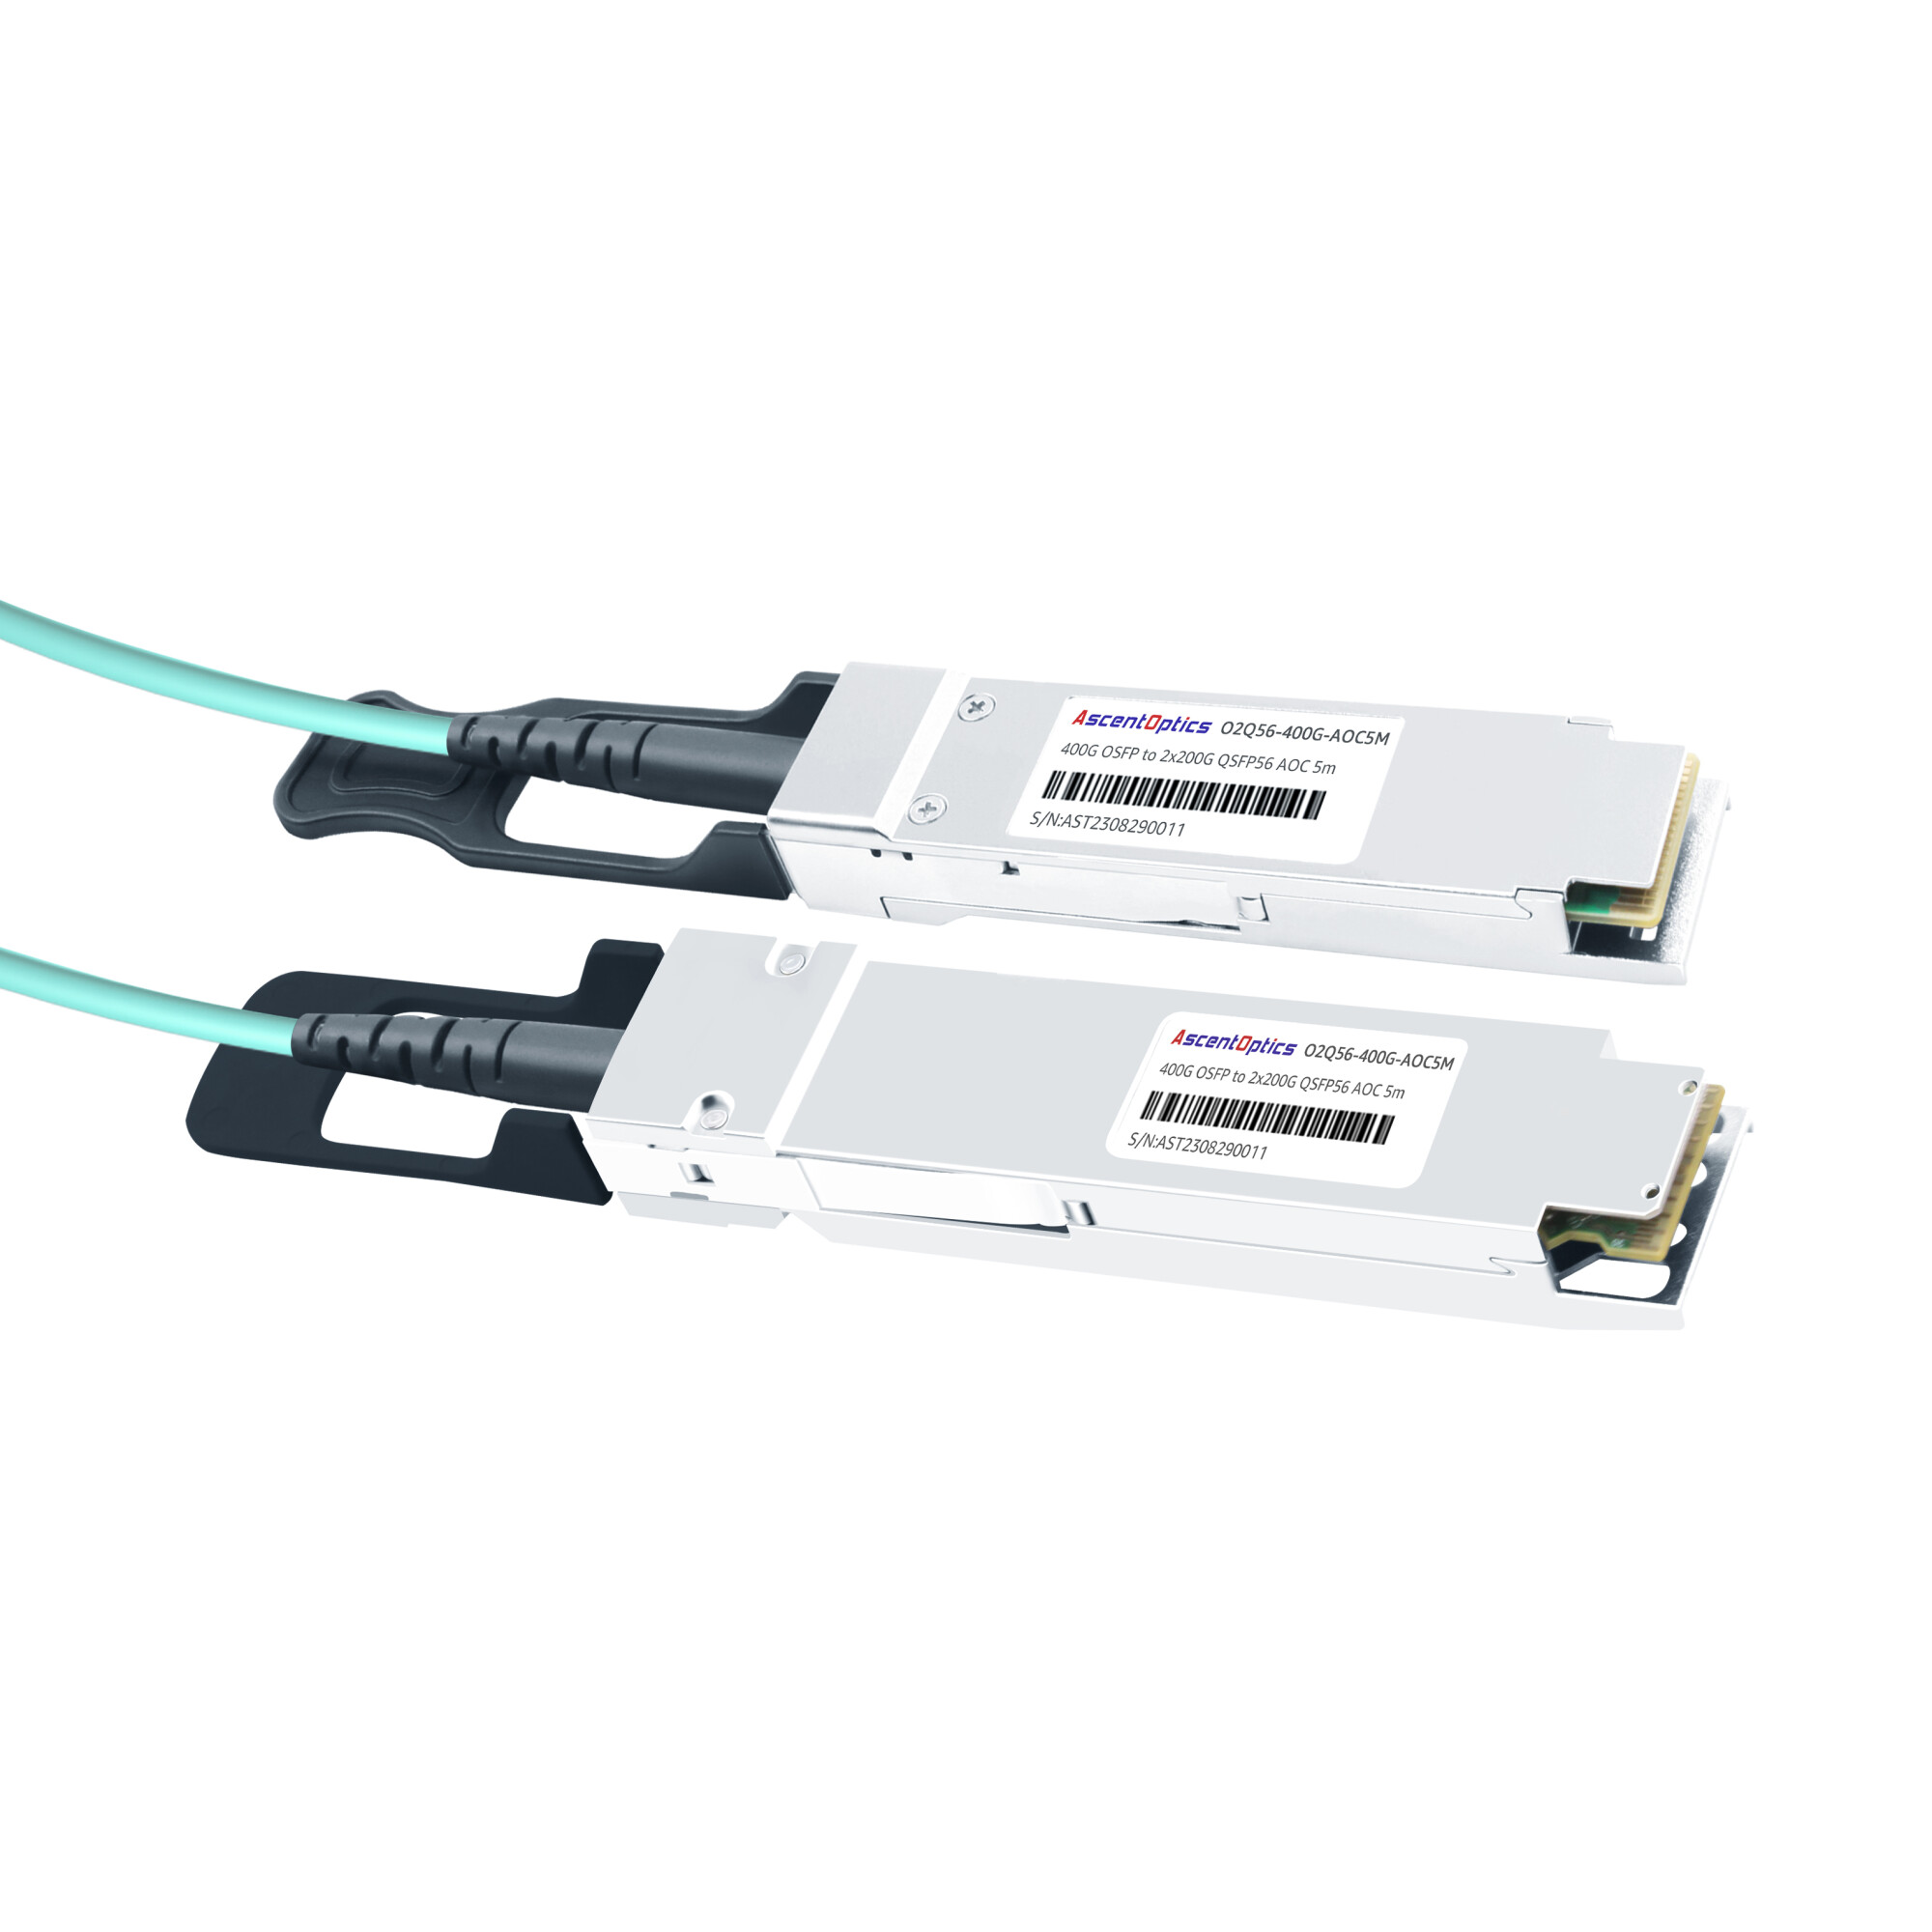 400G OSFP to 2x 200G QSFP56 Breakout Active Optical Cable,5 Meter